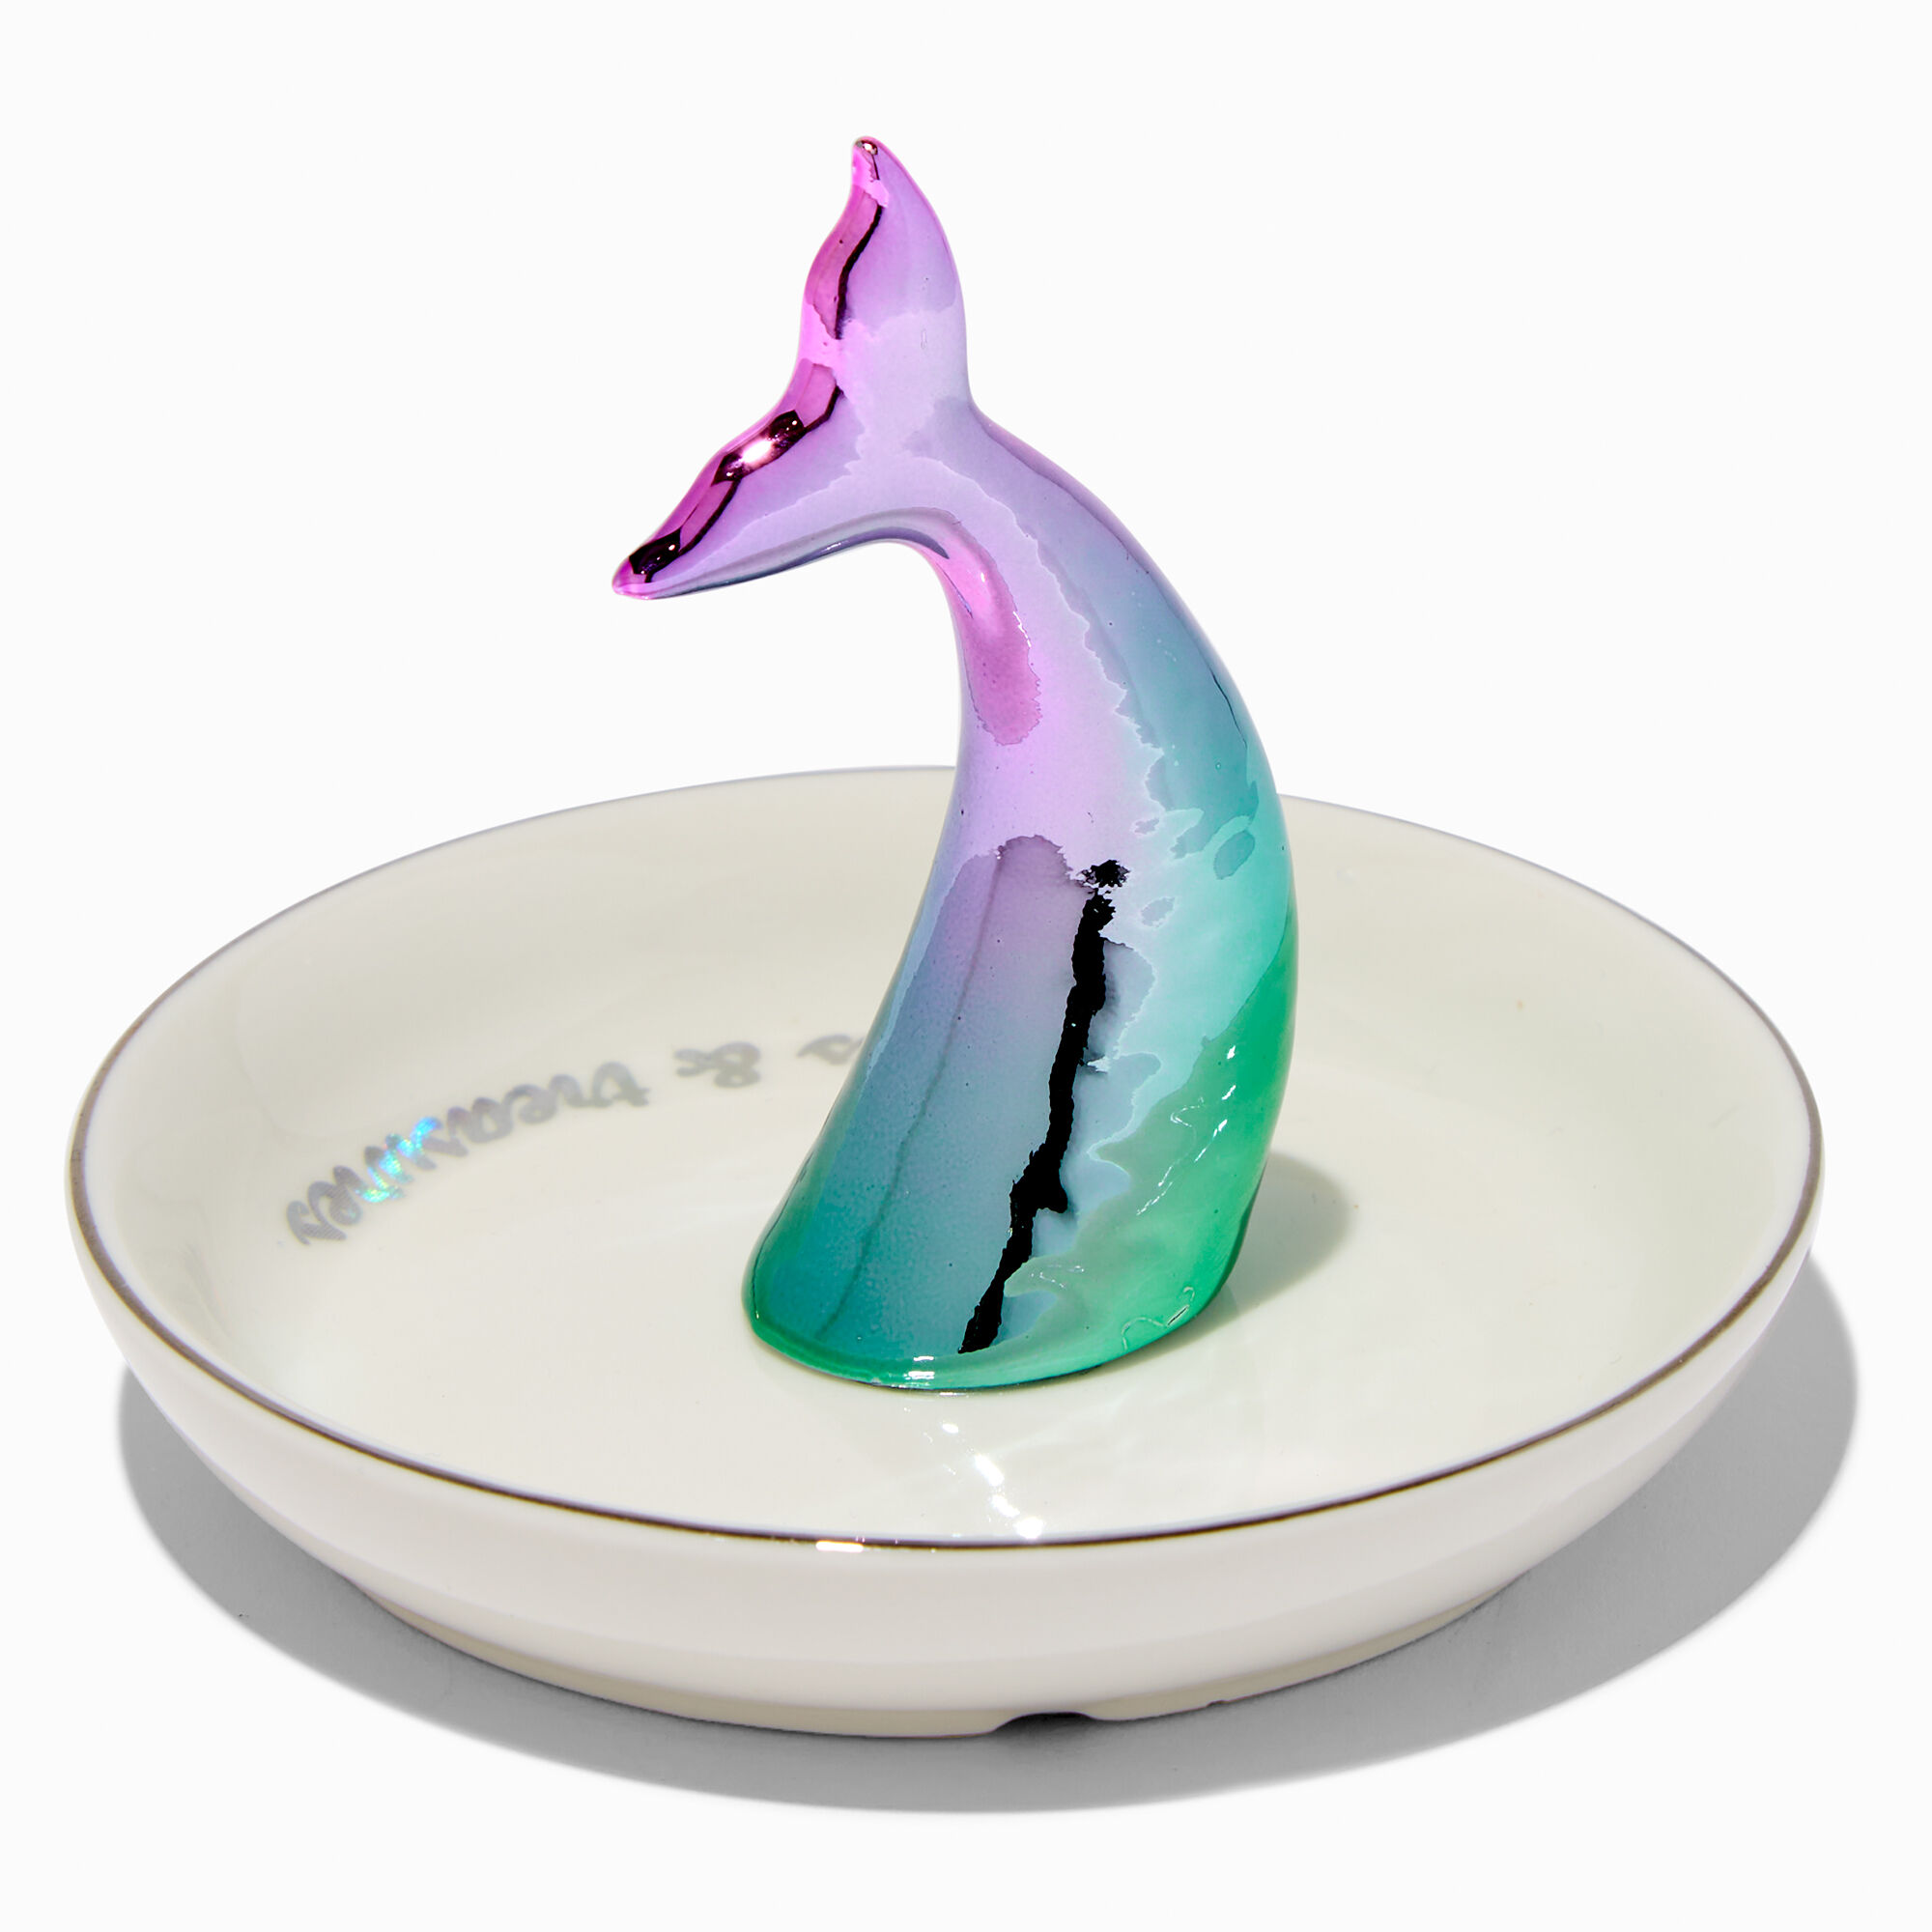 View Claires Iridescent Mermaid Tail Trinket Dish information